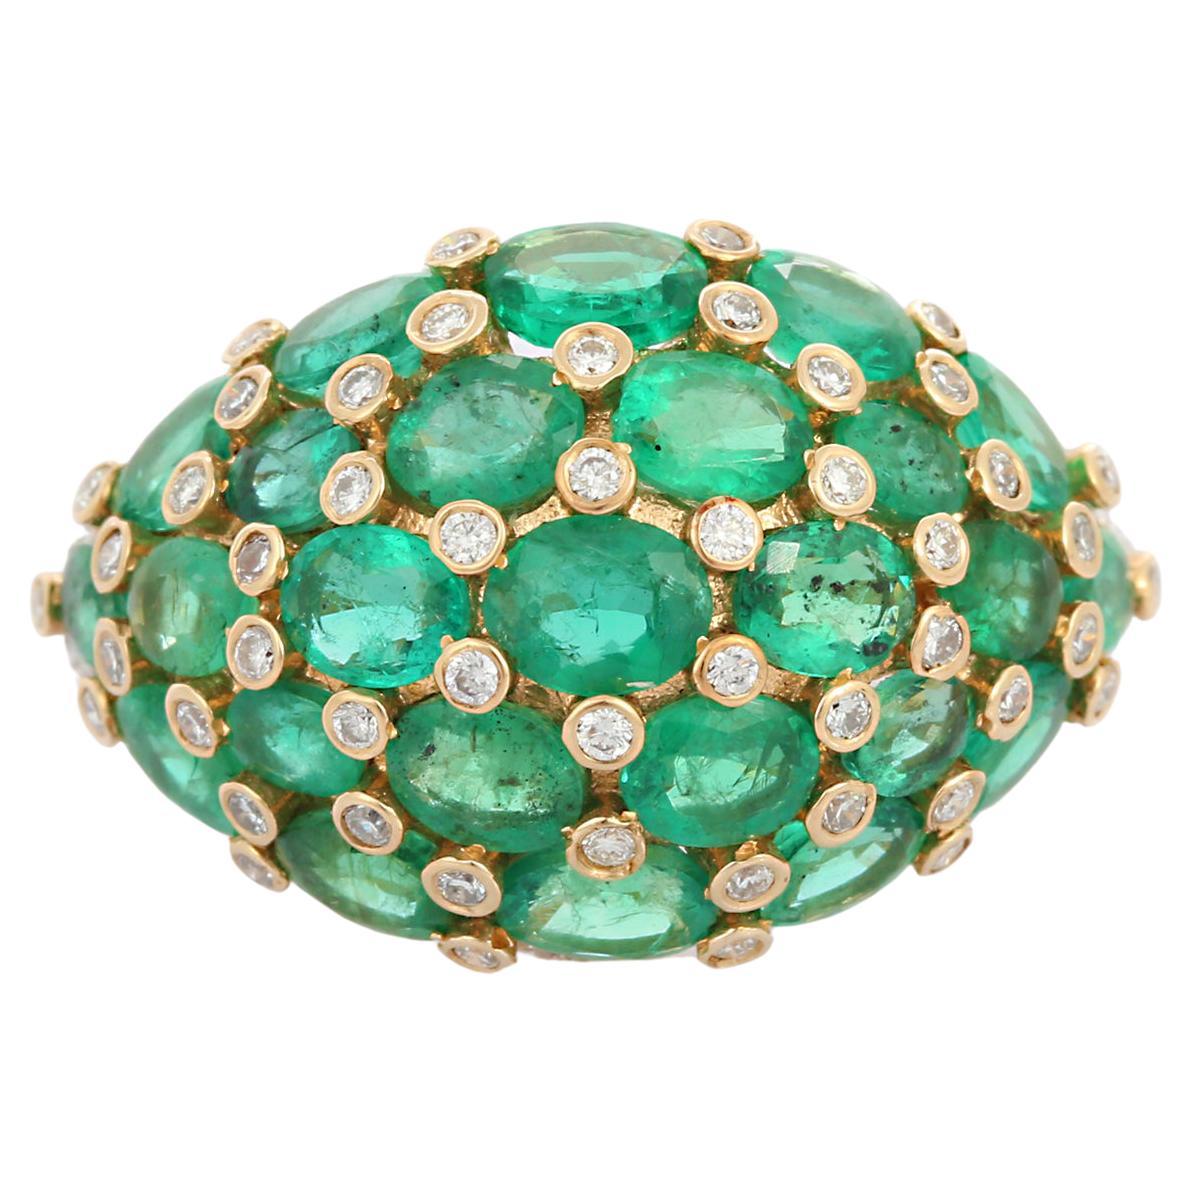 For Sale:  18k Solid Yellow Gold Emerald Diamond Cocktail Ring, Statement Emerald Ring 3